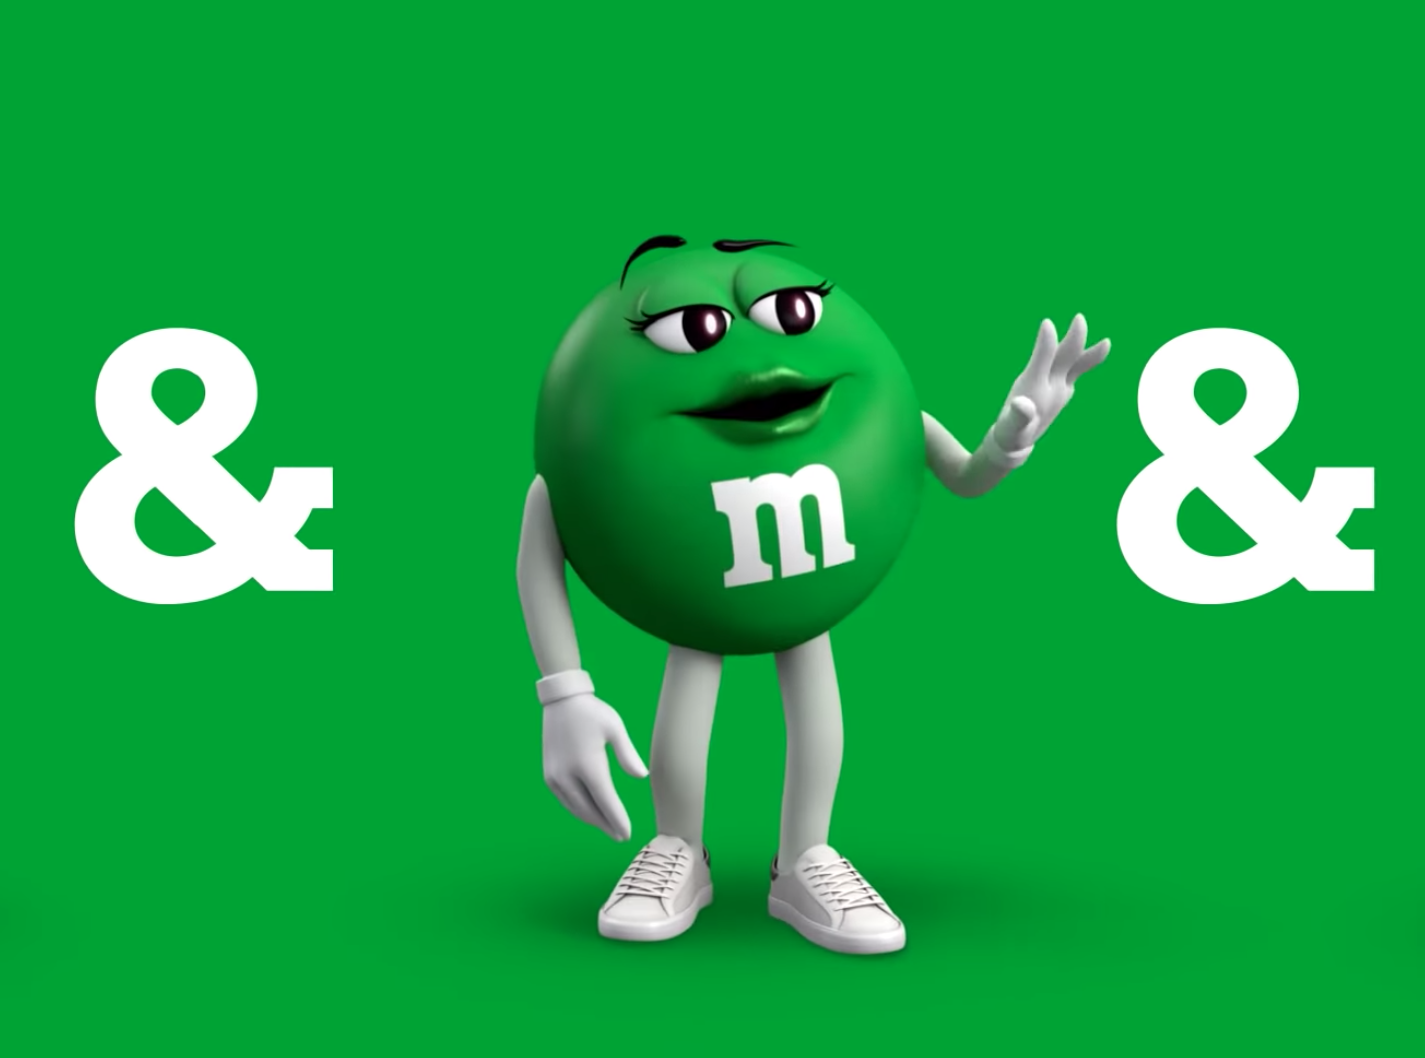 Orange M&M is now a Gen Z icon because of its extreme anxiety